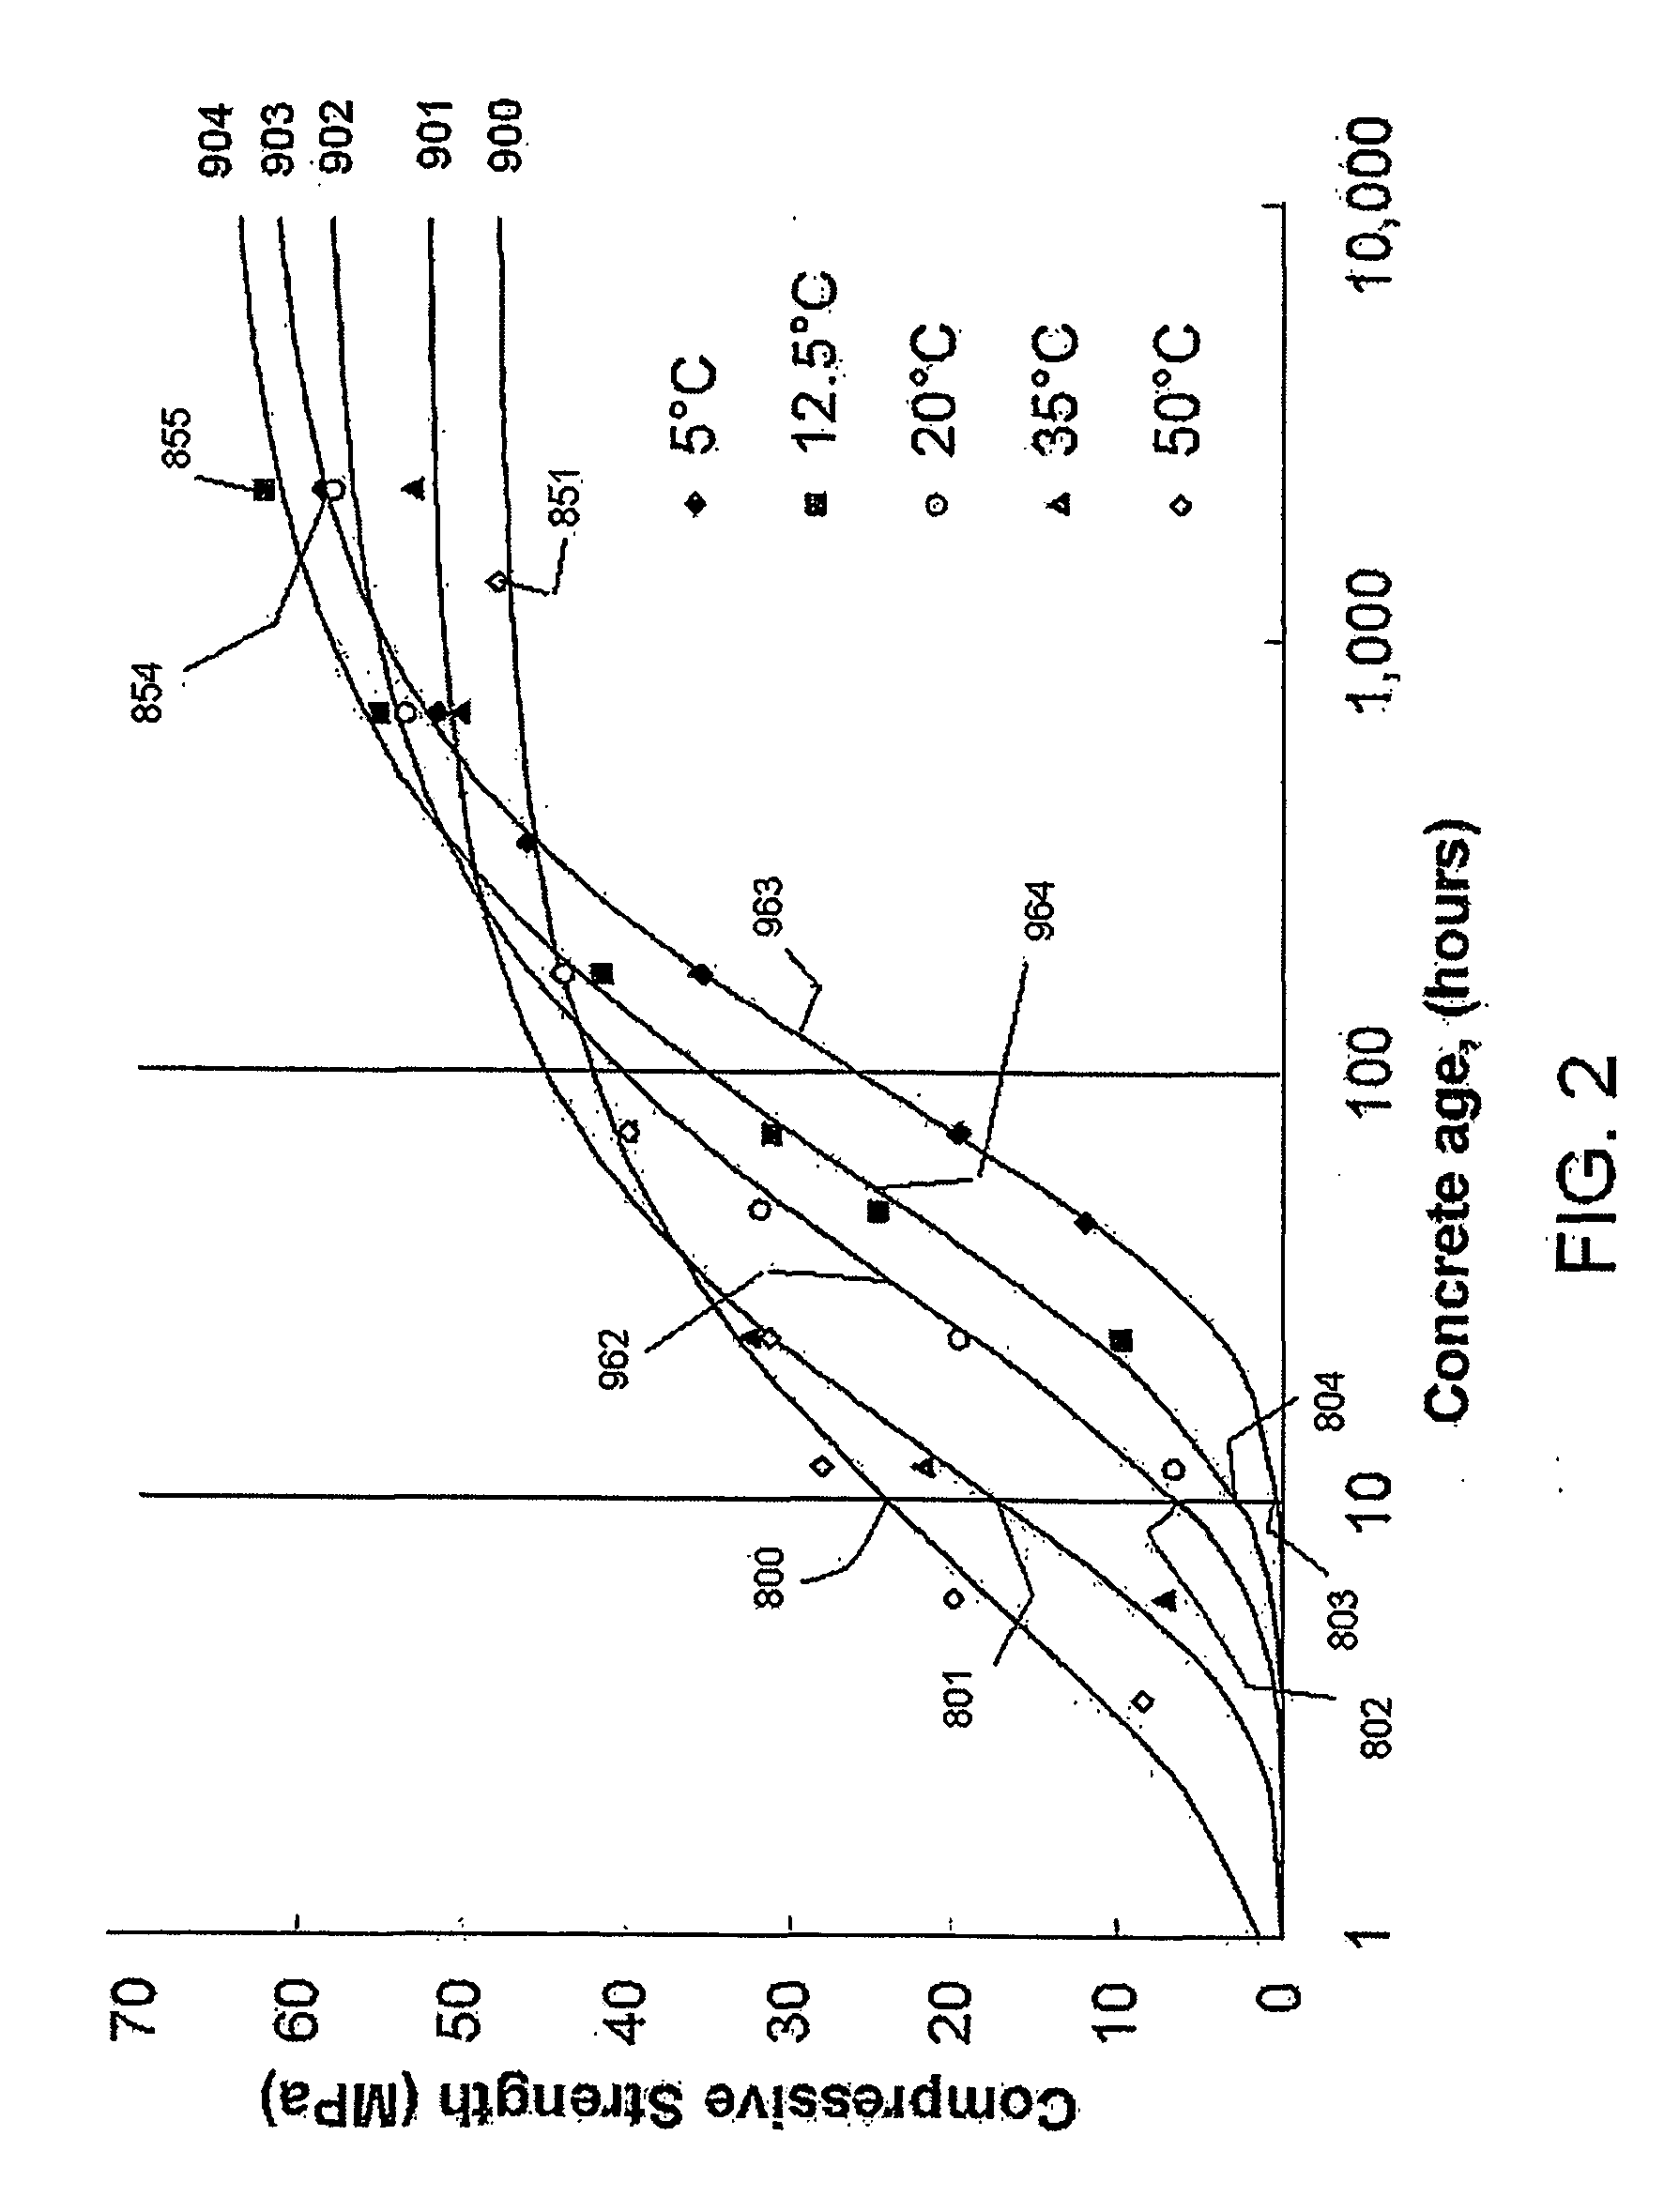 Method and apparatus of curing concrete structures